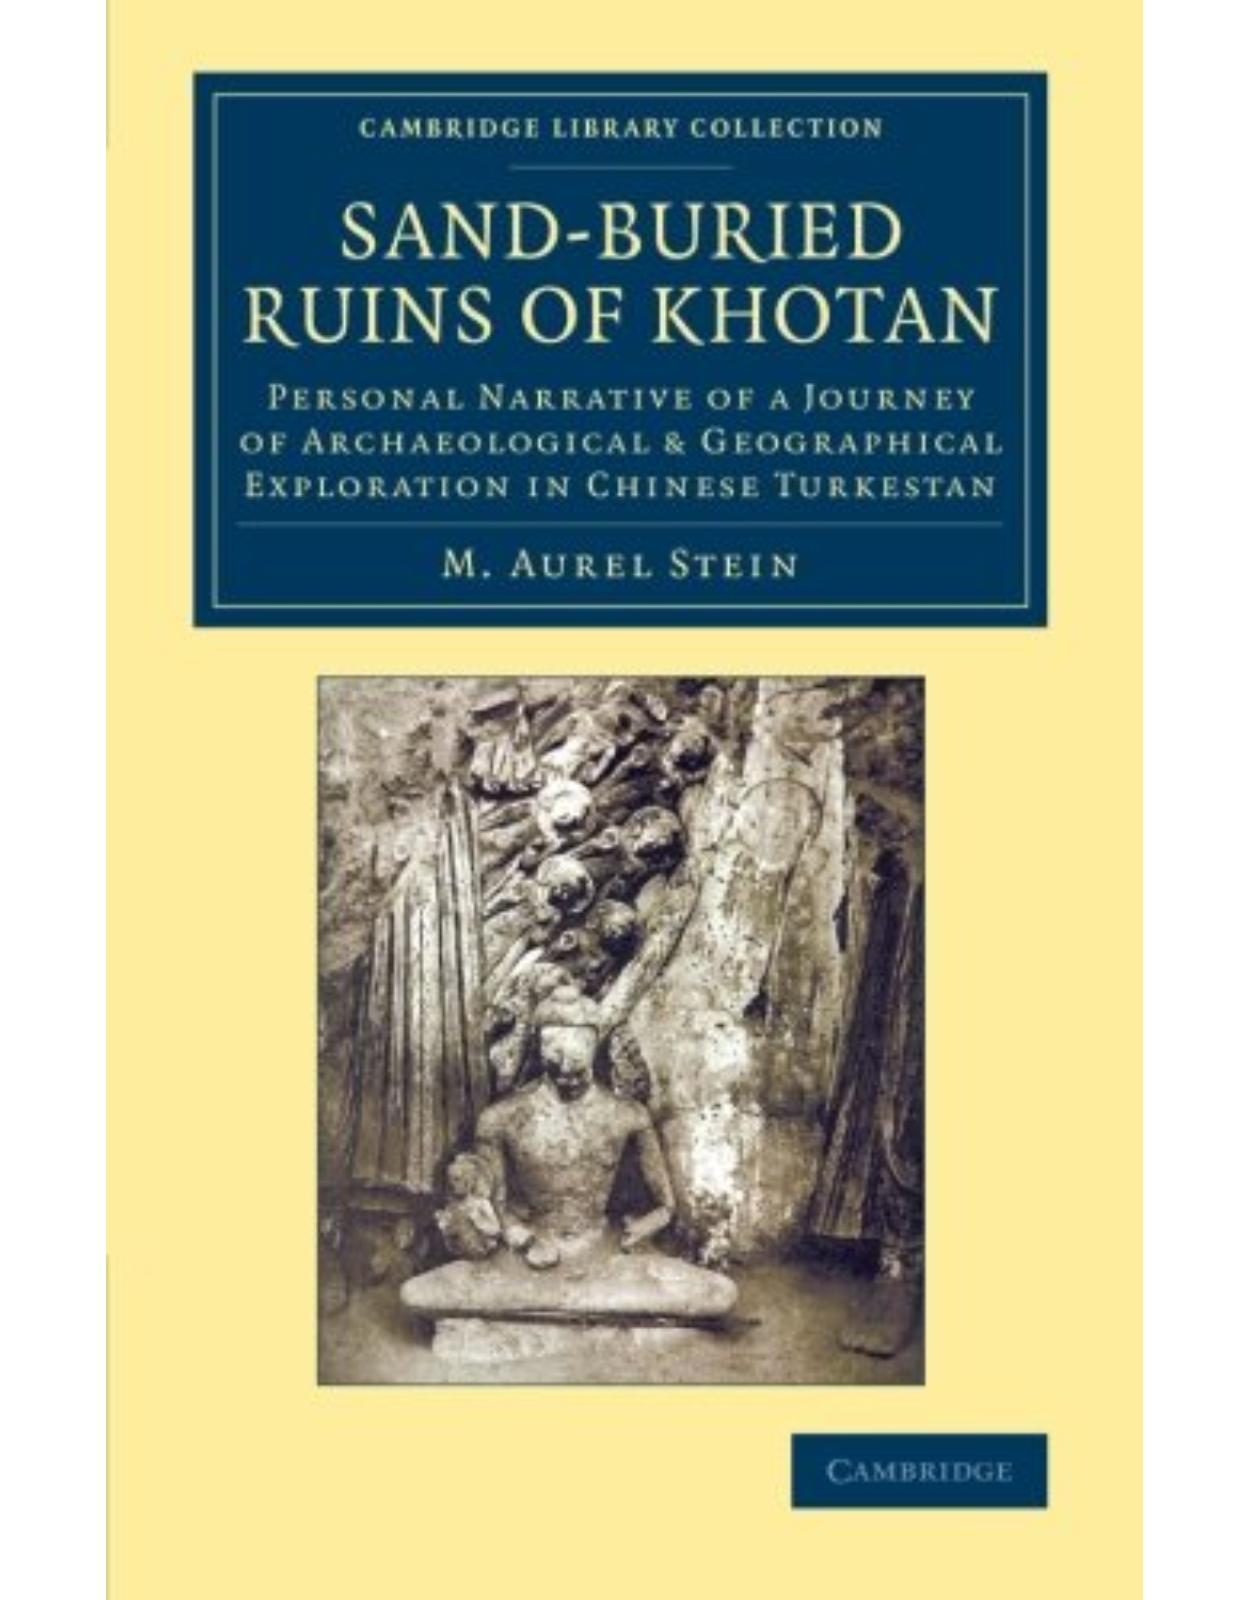 Sand-Buried Ruins of Khotan: Personal Narrative of a Journey of Archaeological & Geographical Exploration in Chinese Turkestan (Cambridge Library Collection - Archaeology)